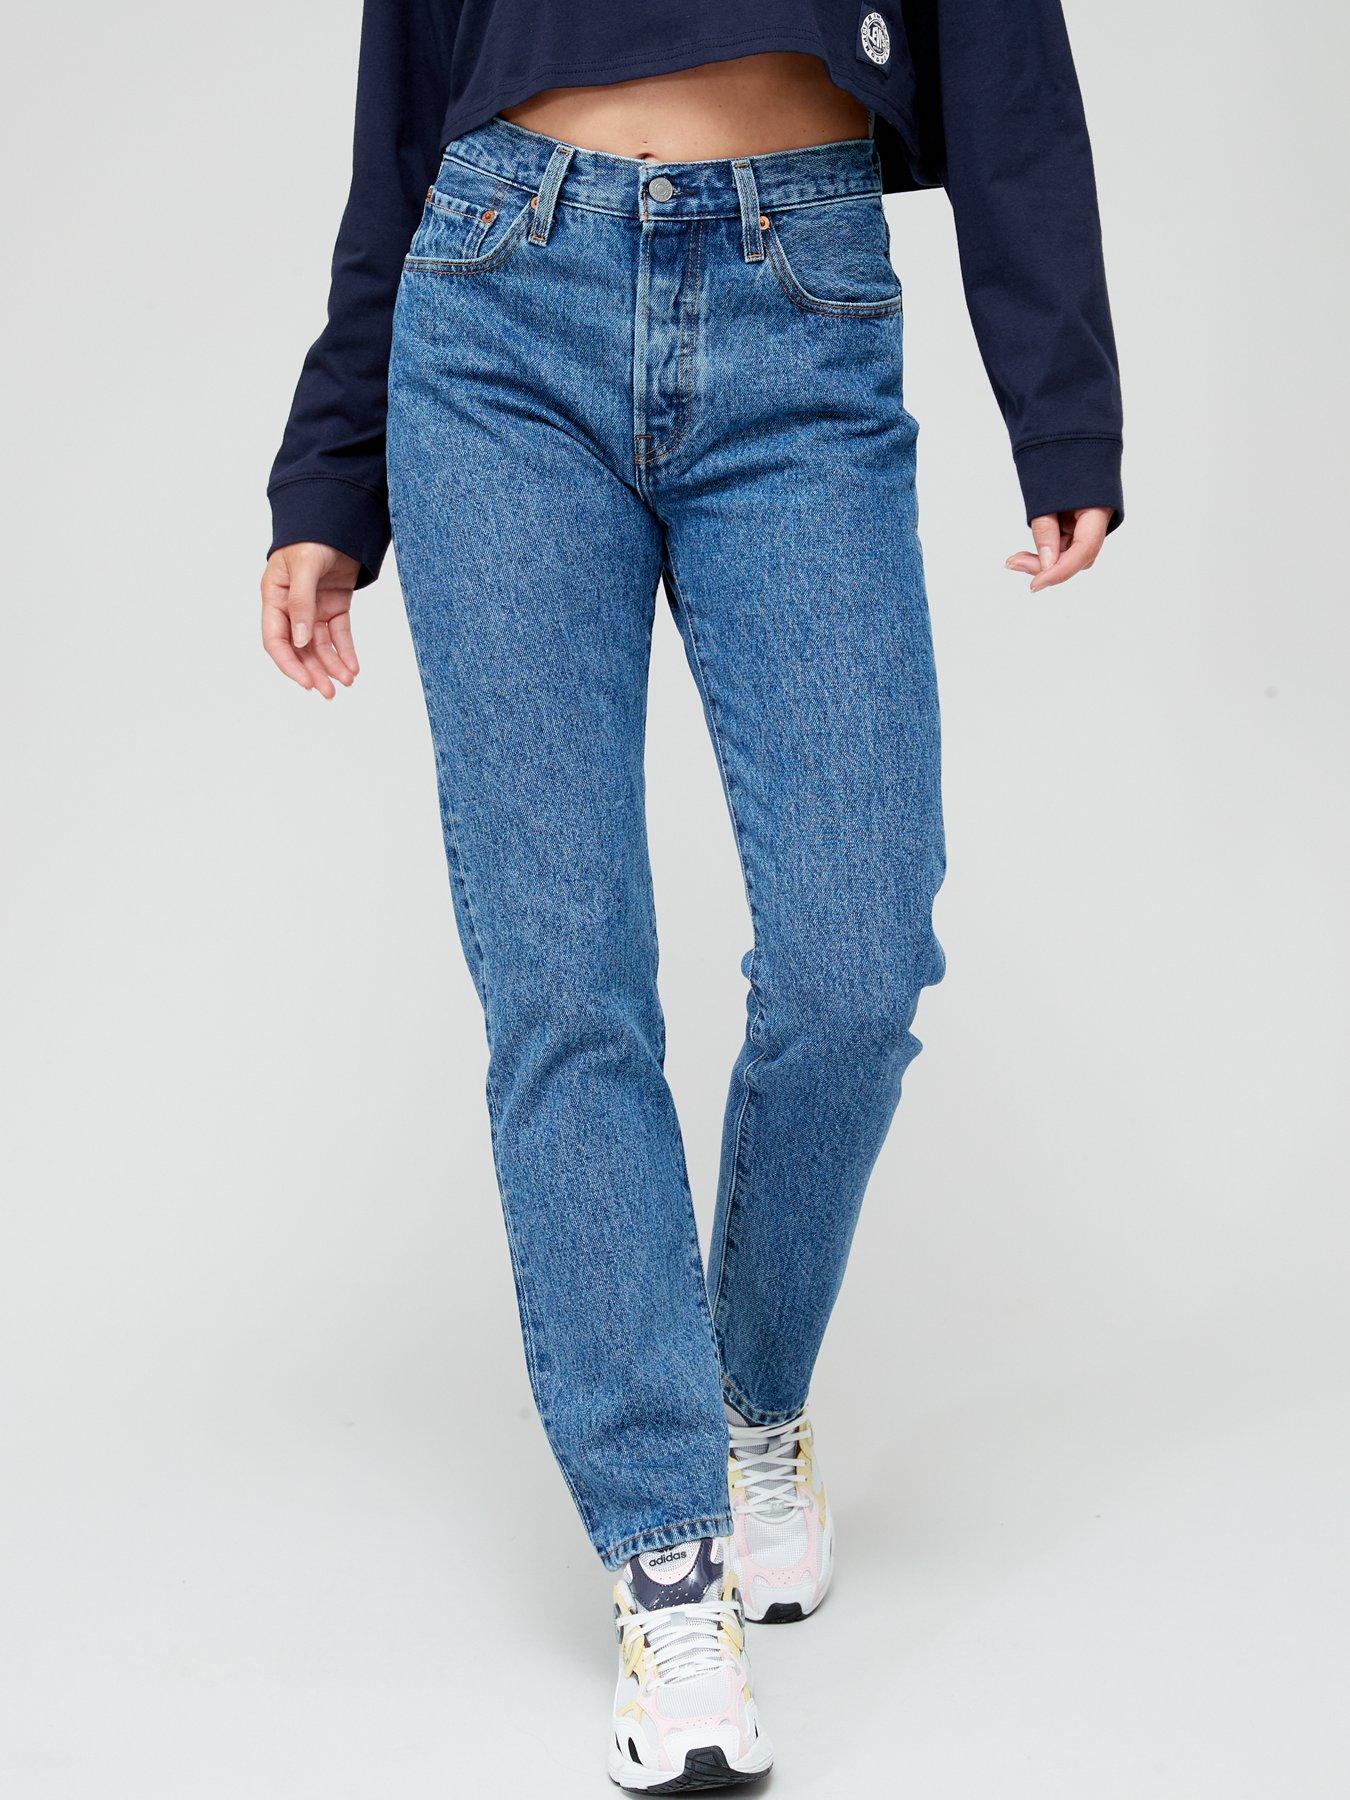 Levi's 501® Jeans For Women - Shout Out Stone | littlewoods.com